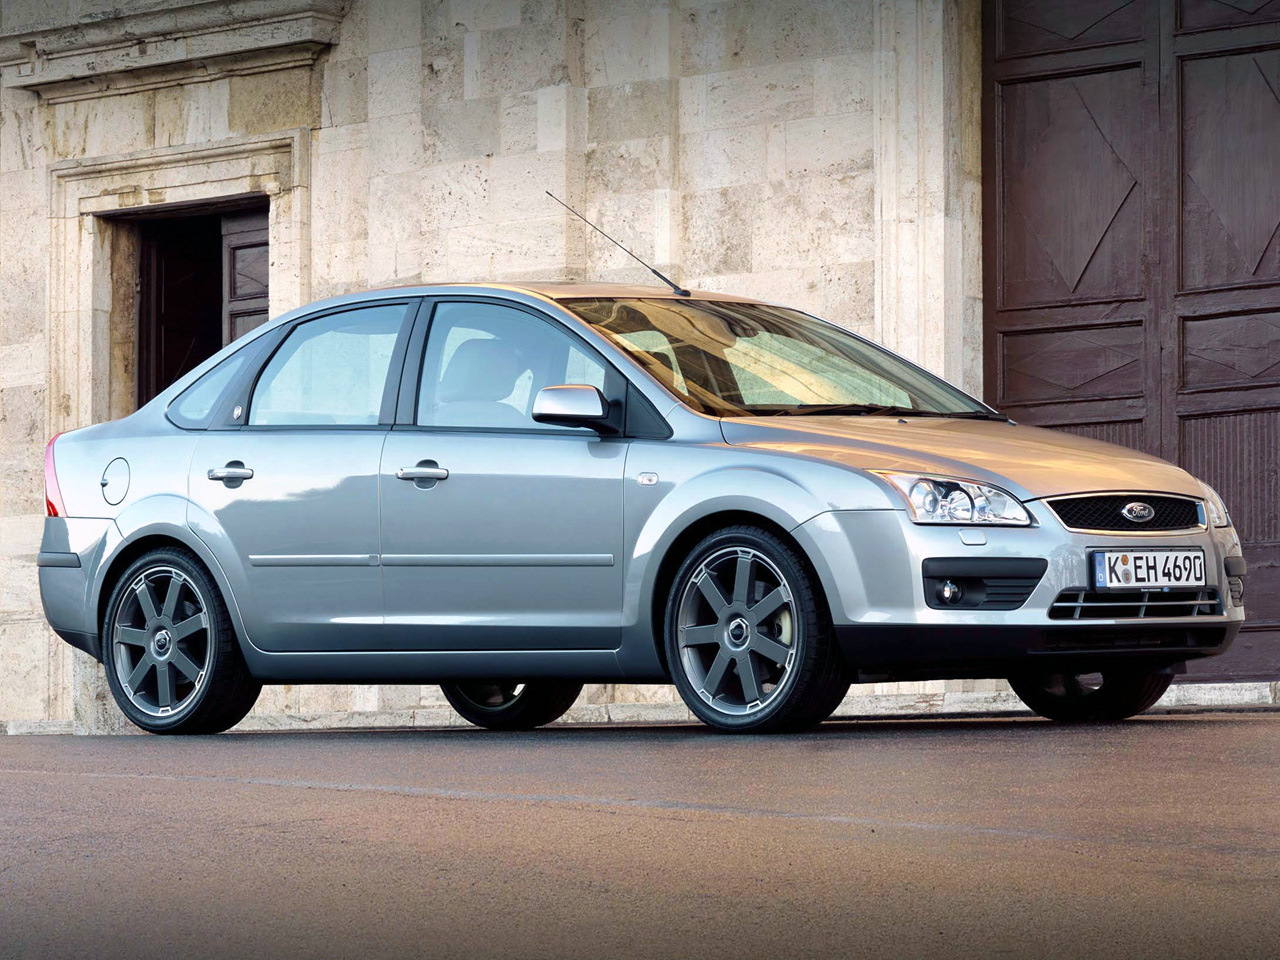 Тест форд фокус 2. Ford Focus 2. Ford Focus 2 седан. Форд фокус 2 2005 седан. Ford Focus 2 седан 2008.